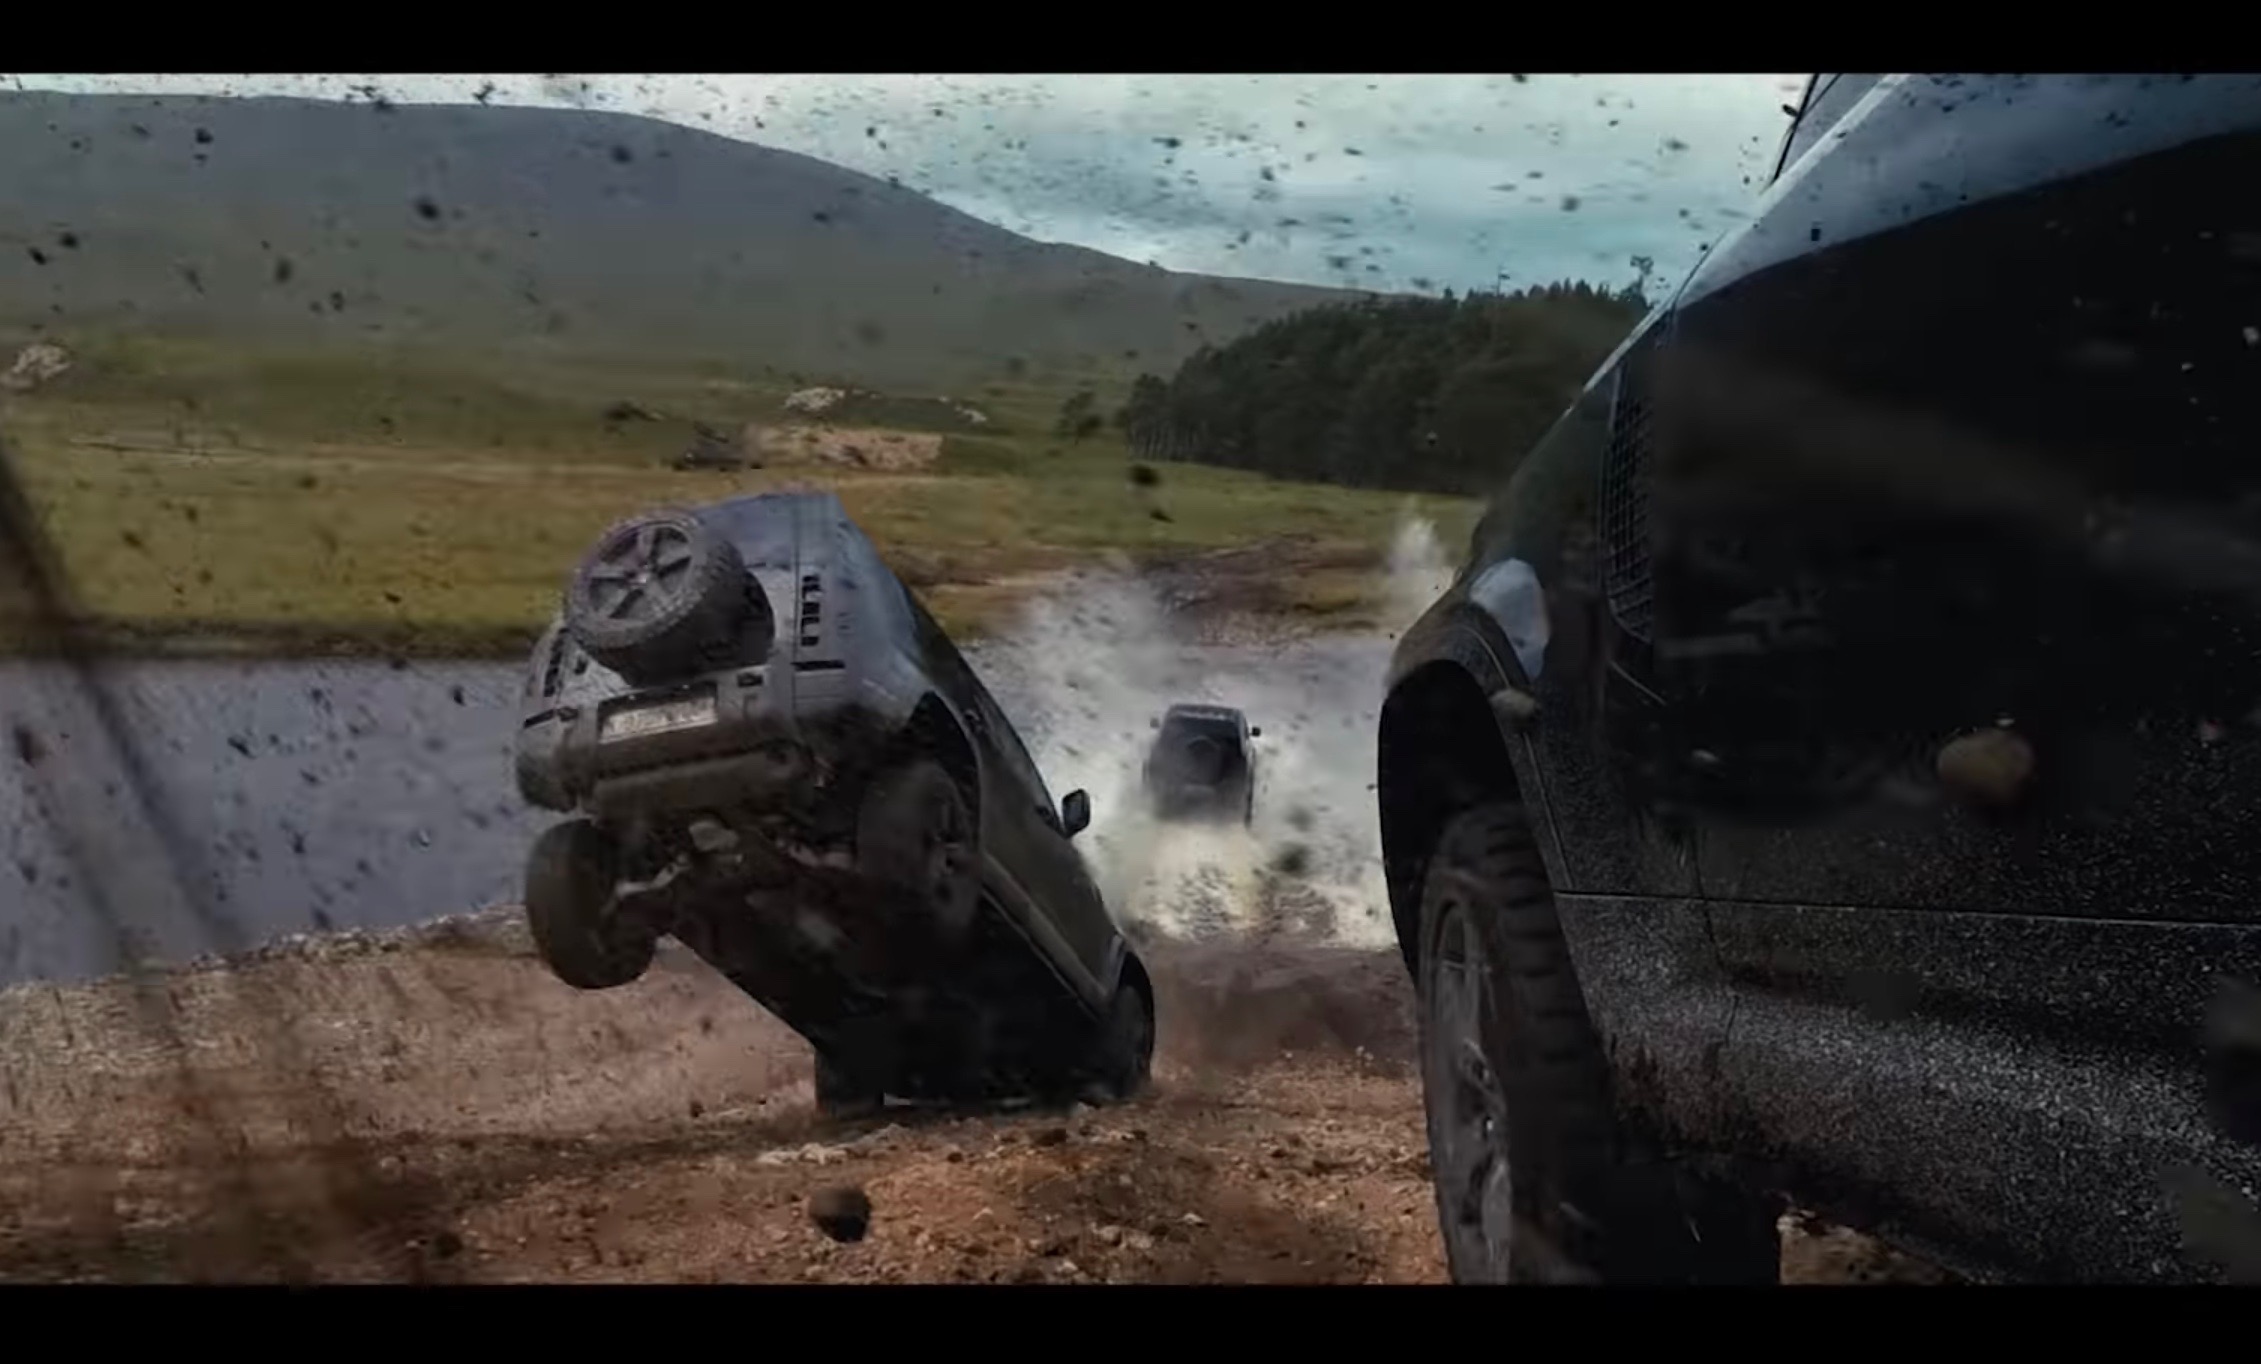 Video: New Land Rover Defender being used in No Time To Die, 007 film